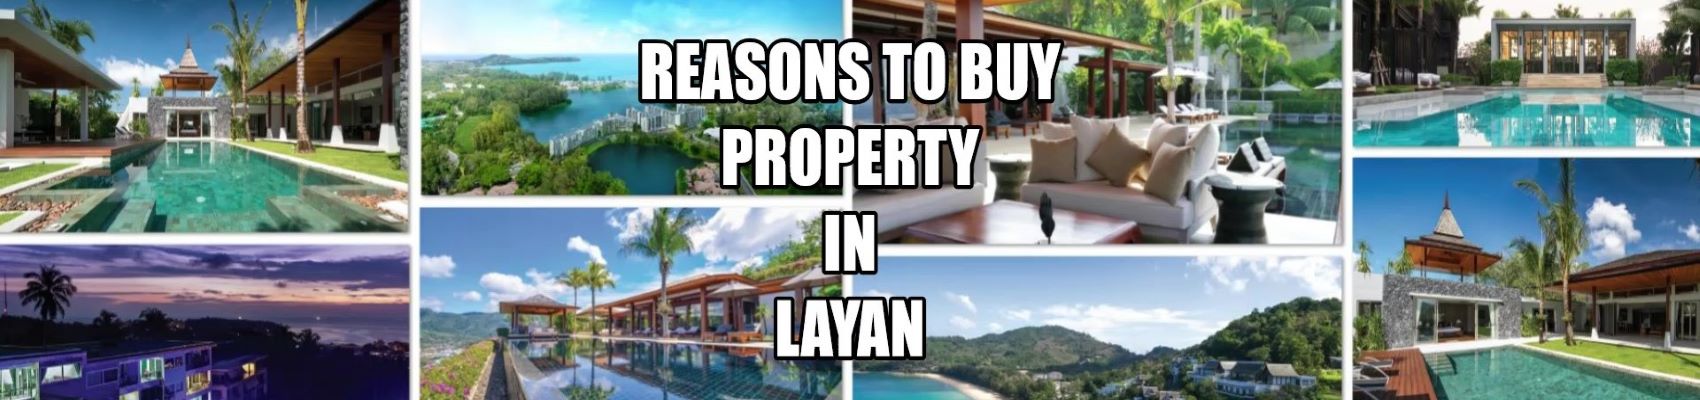 Why Buy Property in Layan